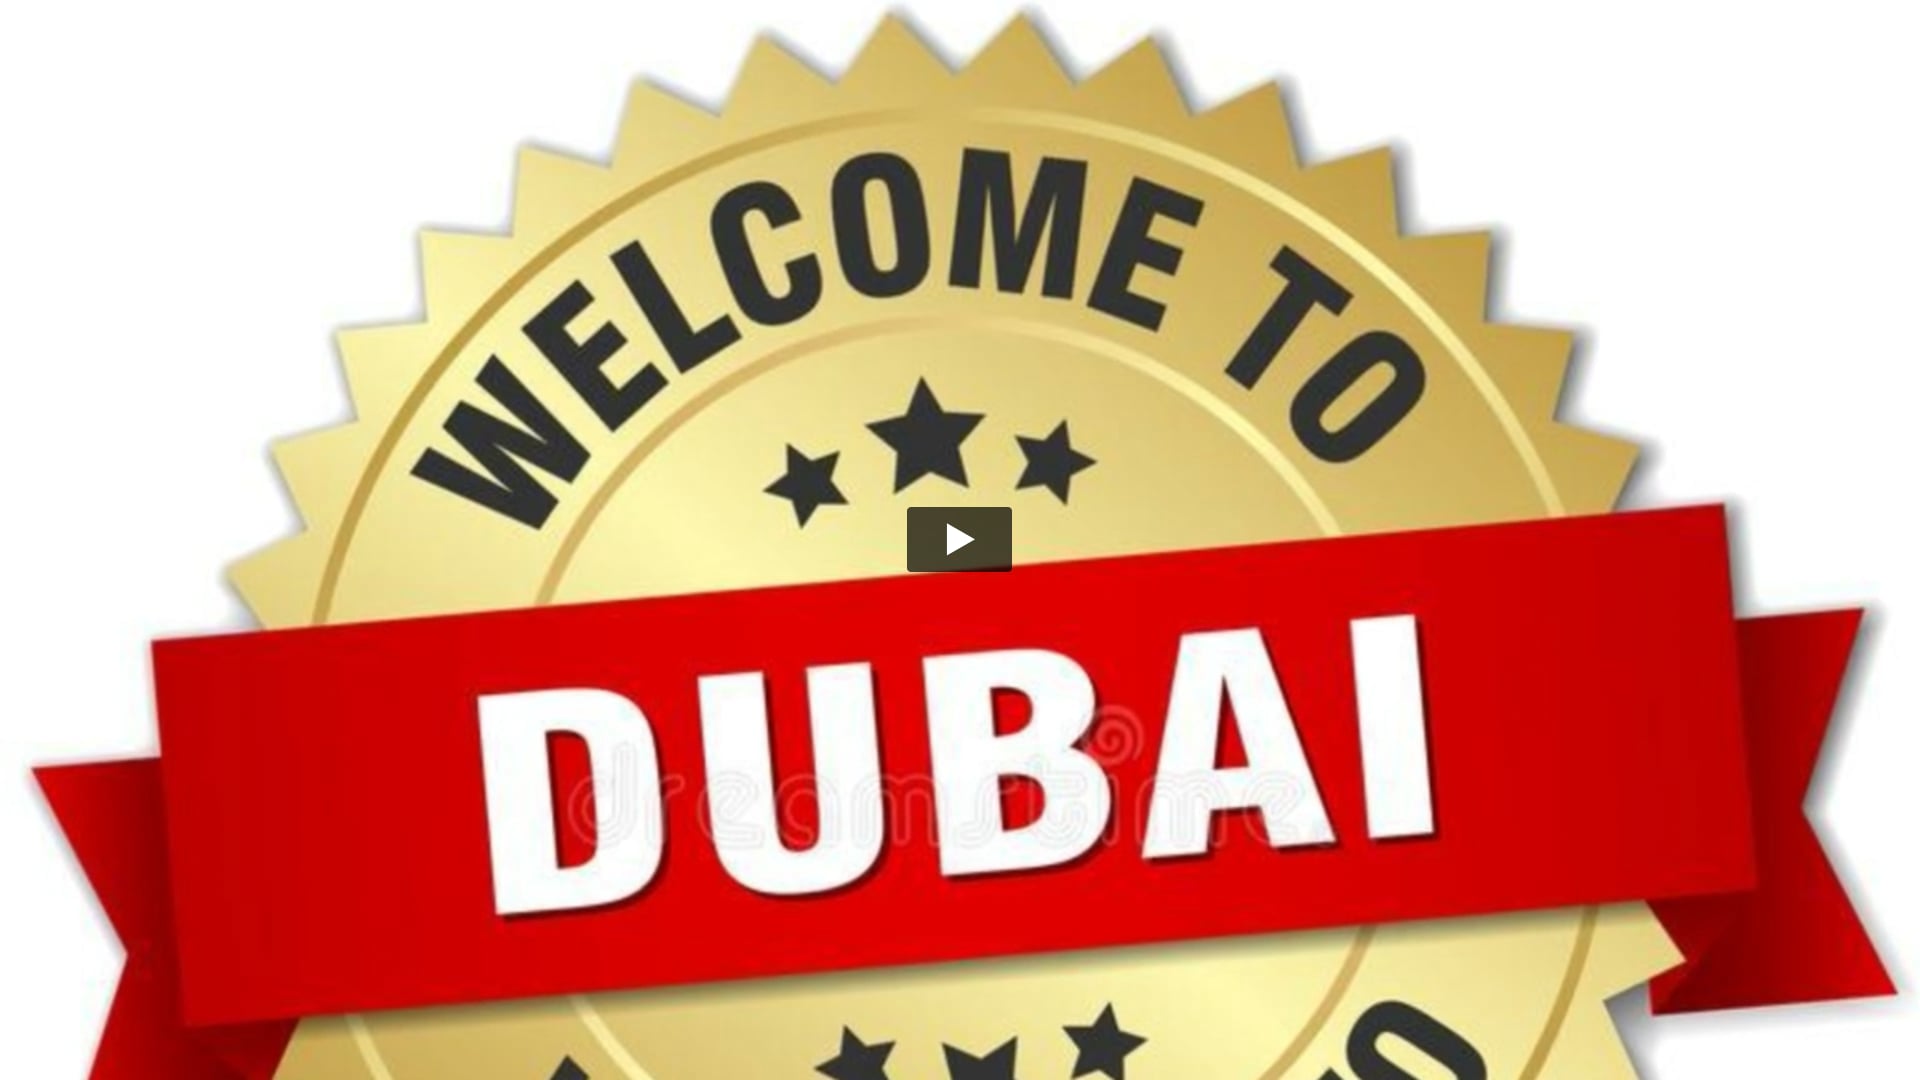 IT'S OFFICIAL! Dubai is our playground! Come w/us & create amazing memories in DUBAI & ABU DHABI!